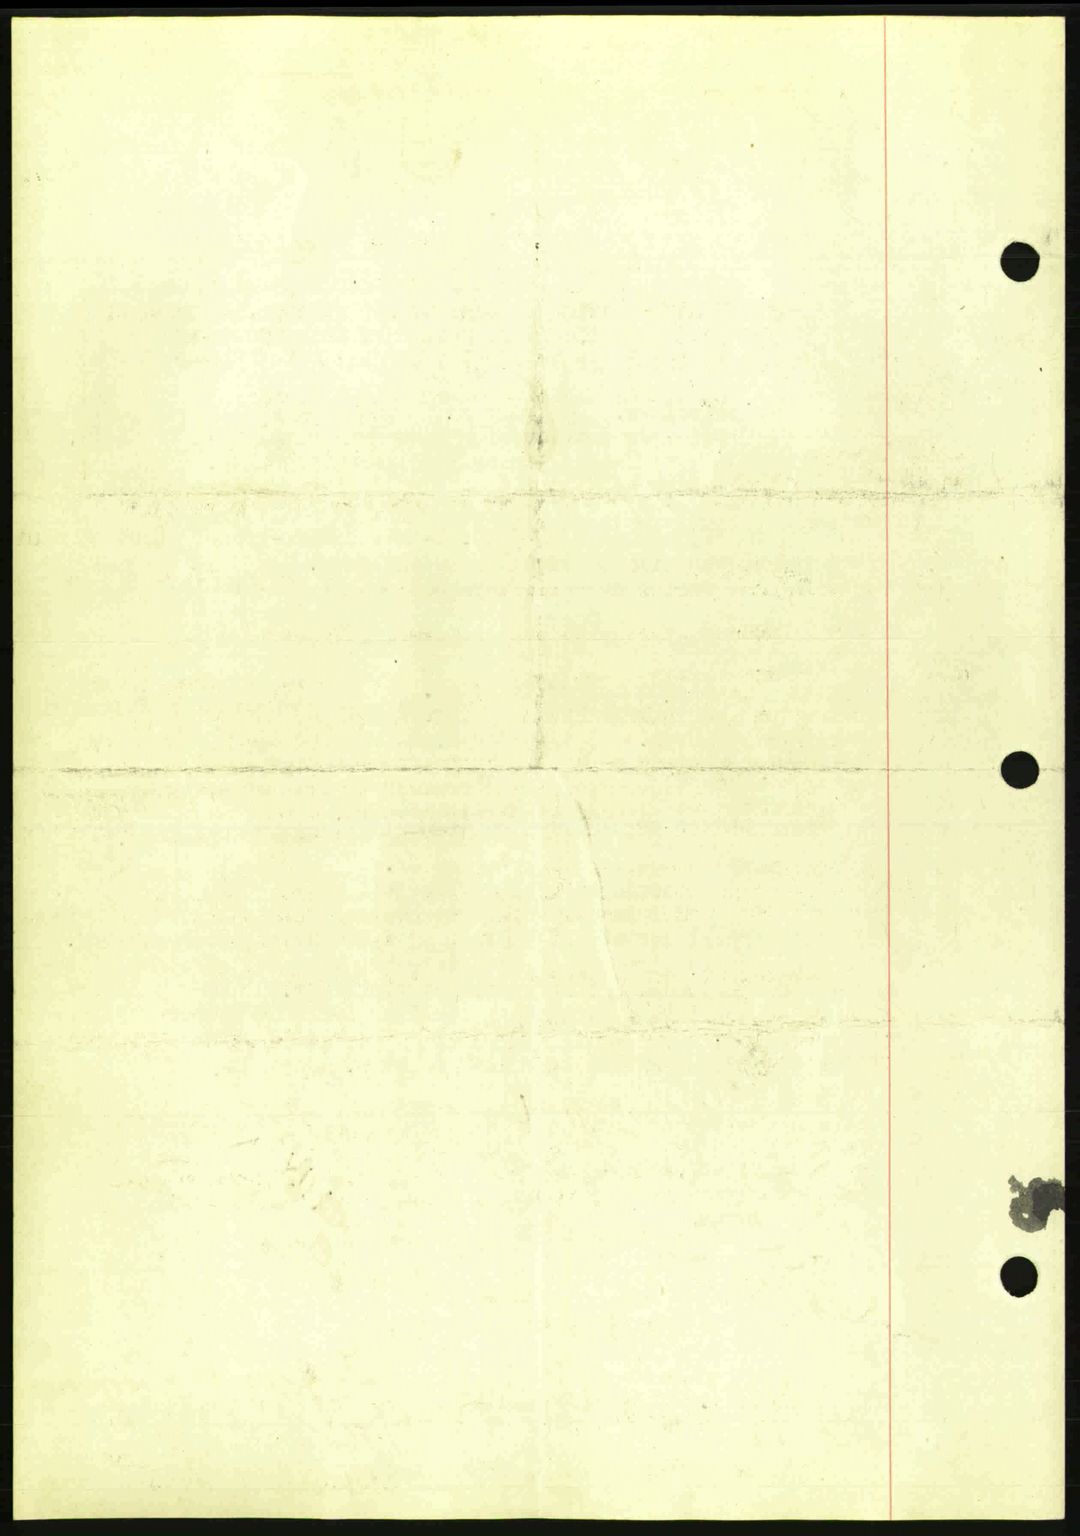 Indre Sogn tingrett, SAB/A-3301/1/G/Gb/Gba/L0030: Mortgage book no. 30, 1935-1937, Deed date: 01.04.1936